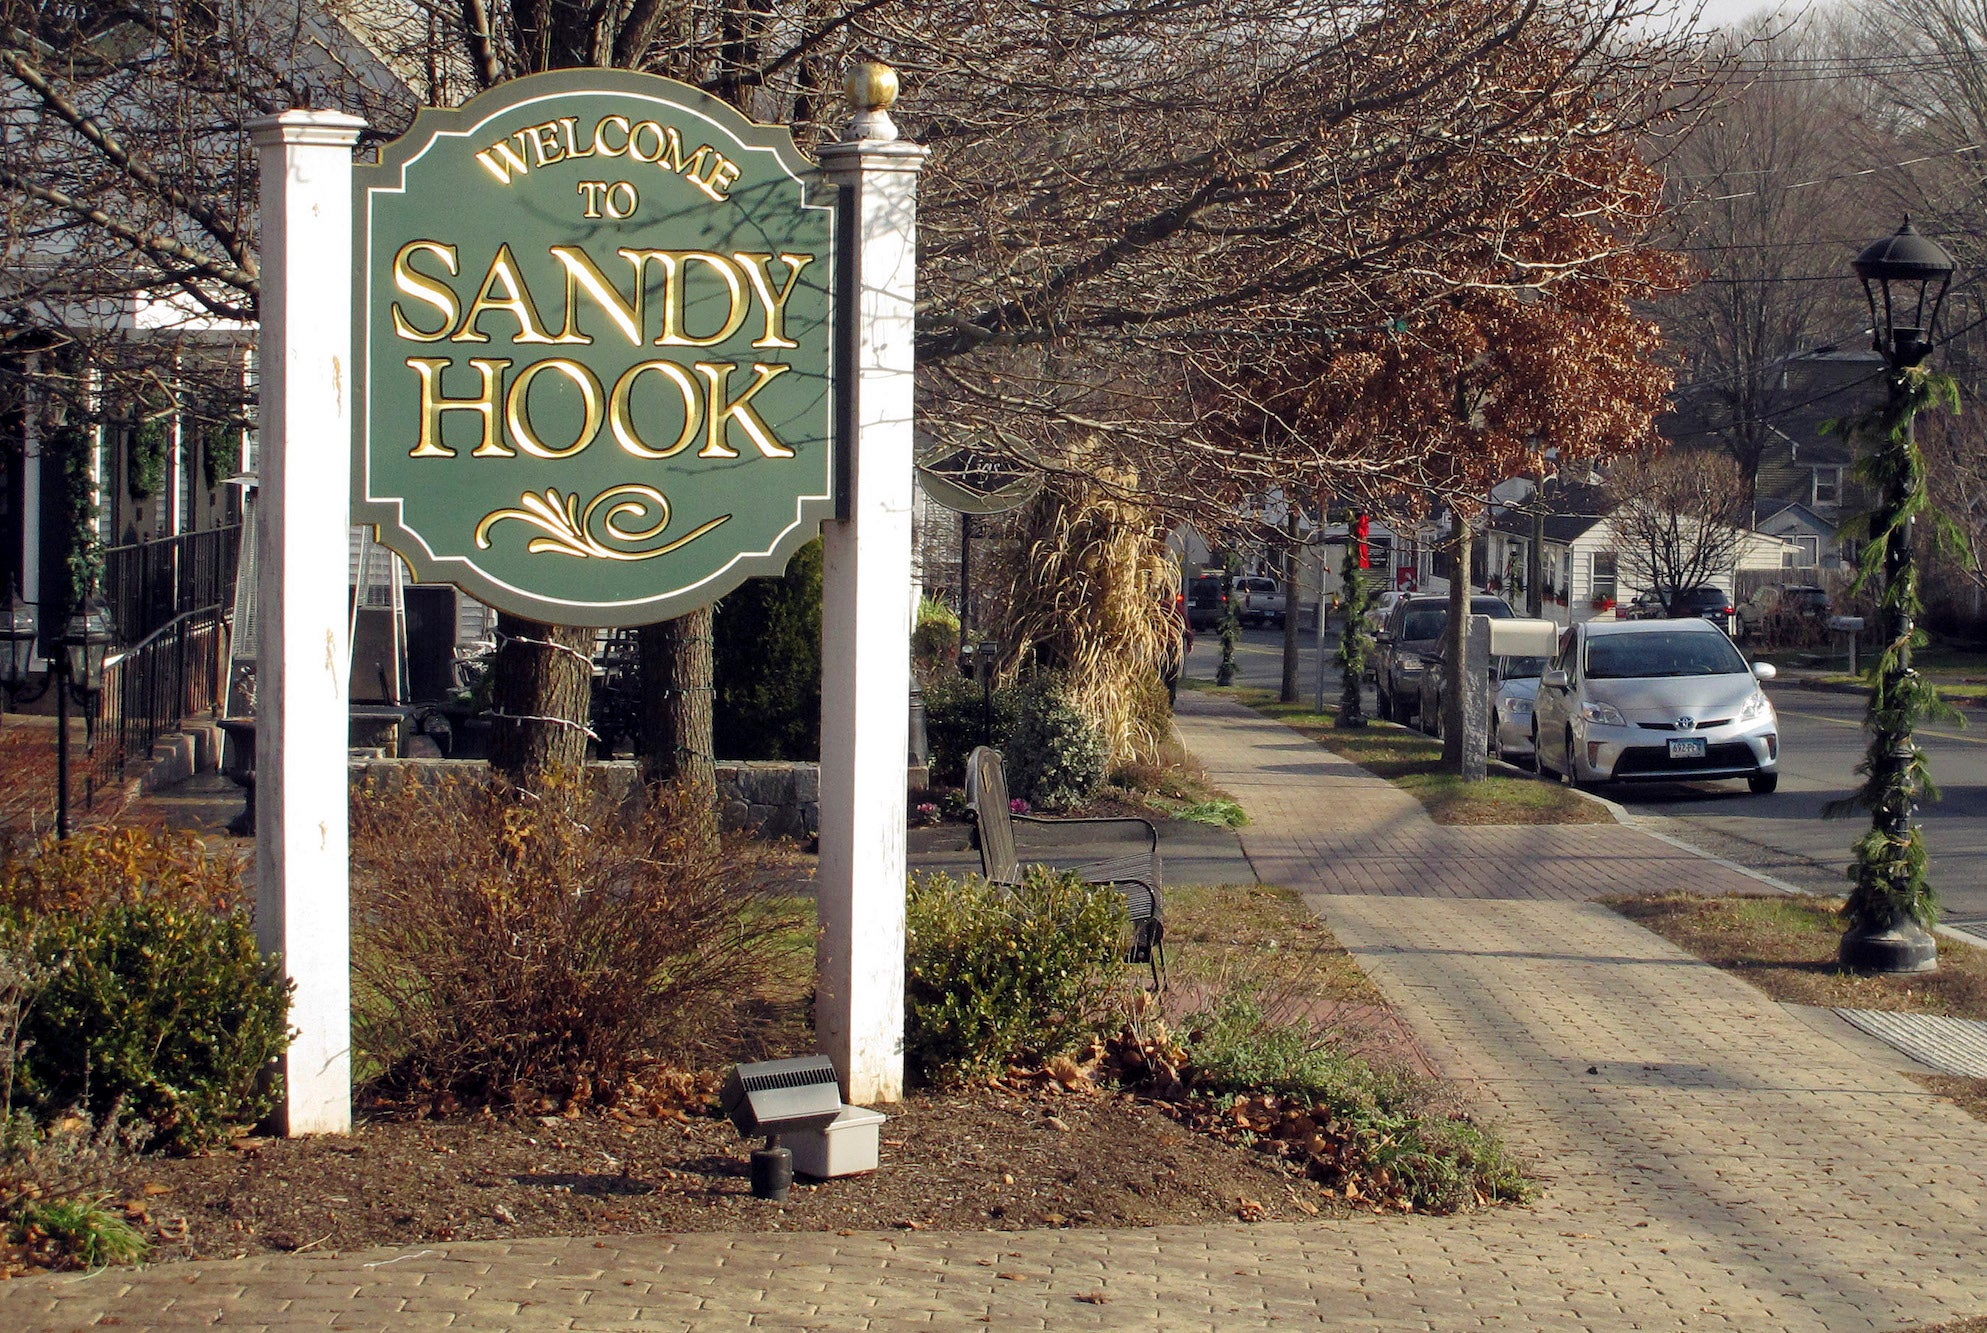 The 2012 shooting at Sandy Hook Elementary left 26 dead, including 20 children.